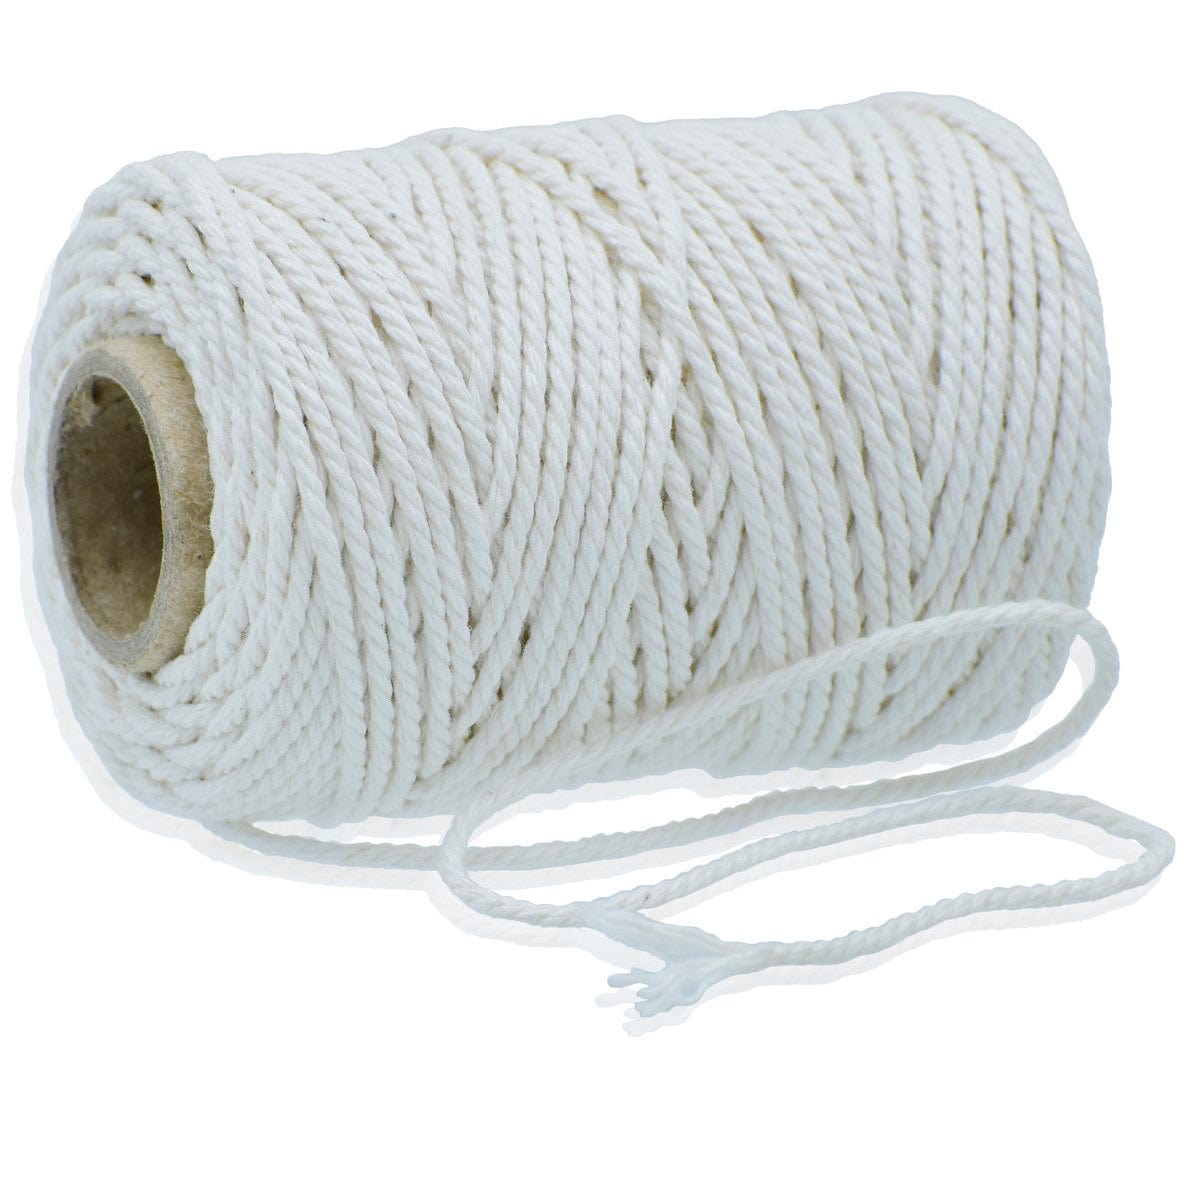 jags-mumbai Jute and paper rope Jags Craft Cotton Rope Off White Colour 4Pcs JCCR07